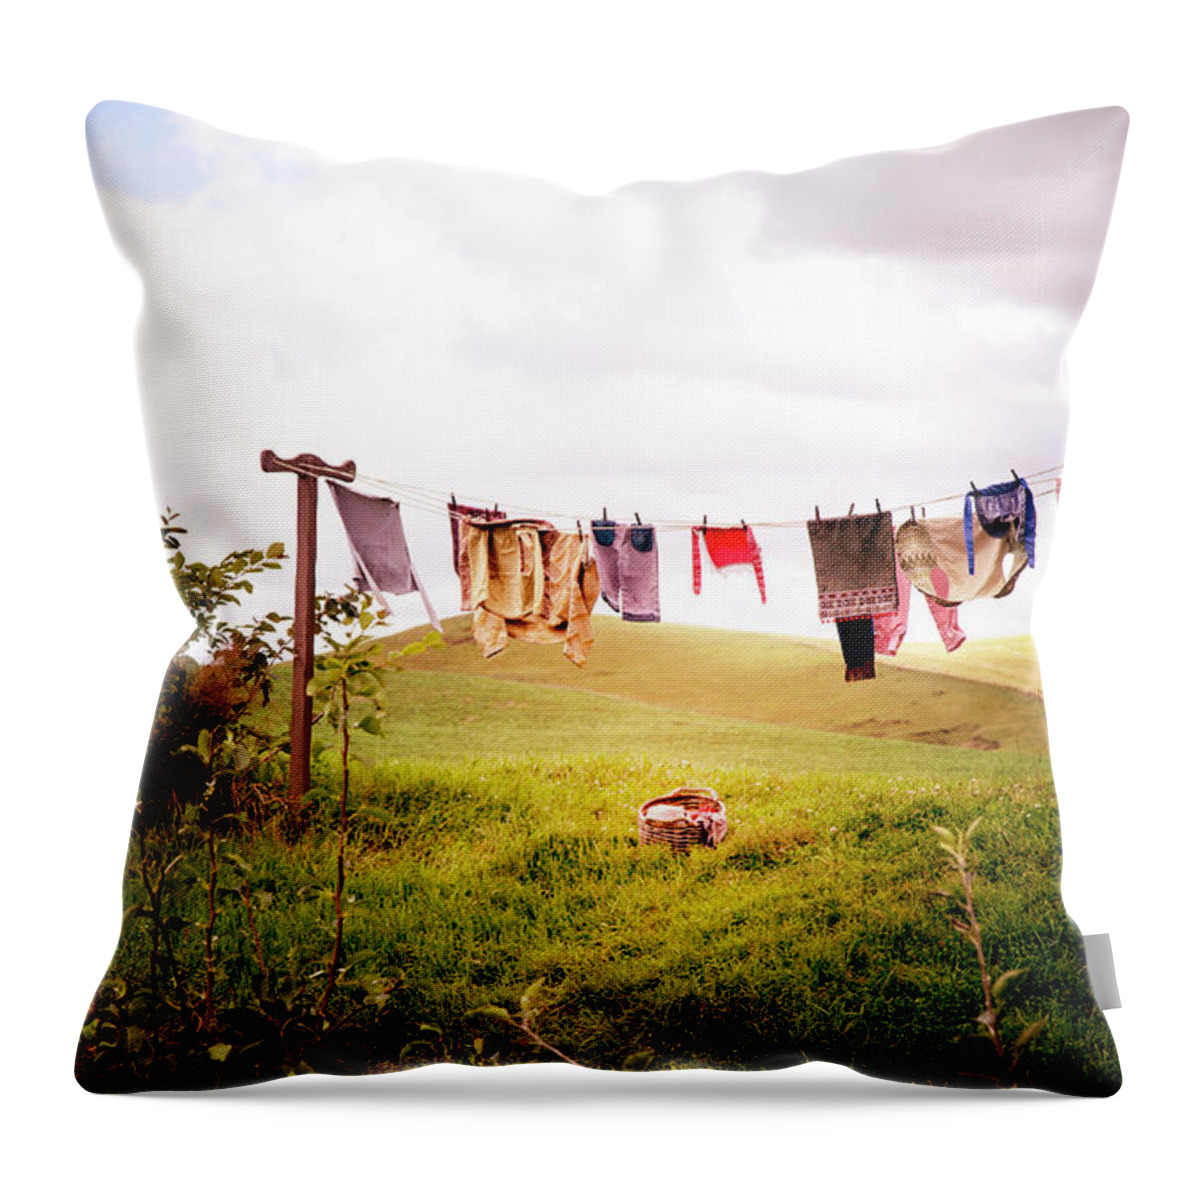 Hobbits Throw Pillow featuring the photograph Gorgeous Sunny Day for Hobbits by Kathryn McBride